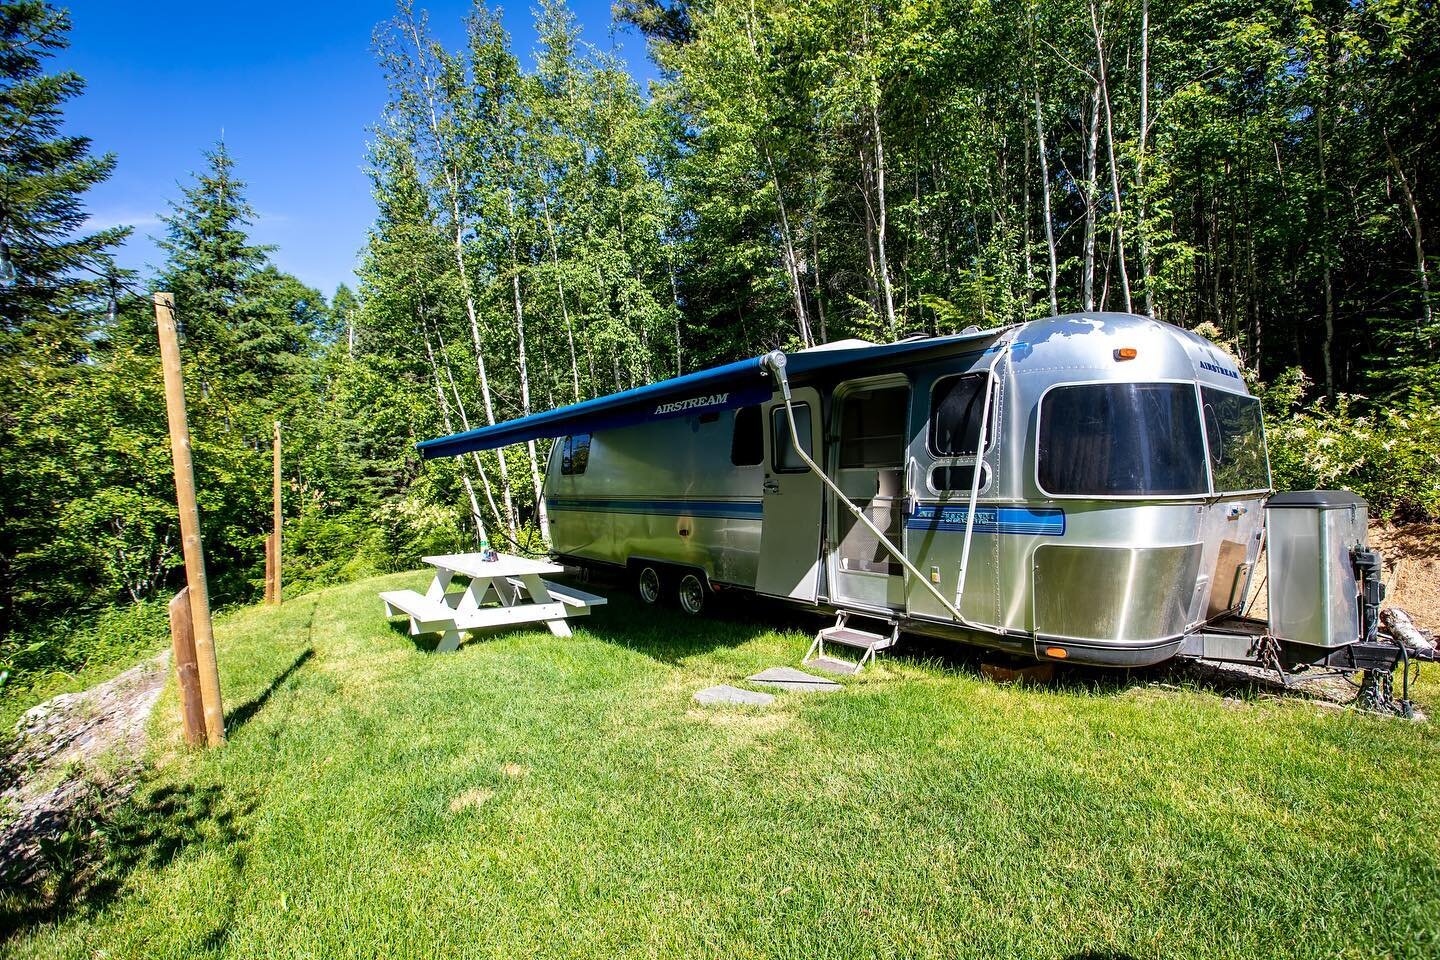 This summer try out  glamping in the awesome airstream on the Back Forty property! #rvliving
#traveltrailer
#vanlife
#adventuretime
#exploremore
#wanderlust
#roadtripusa